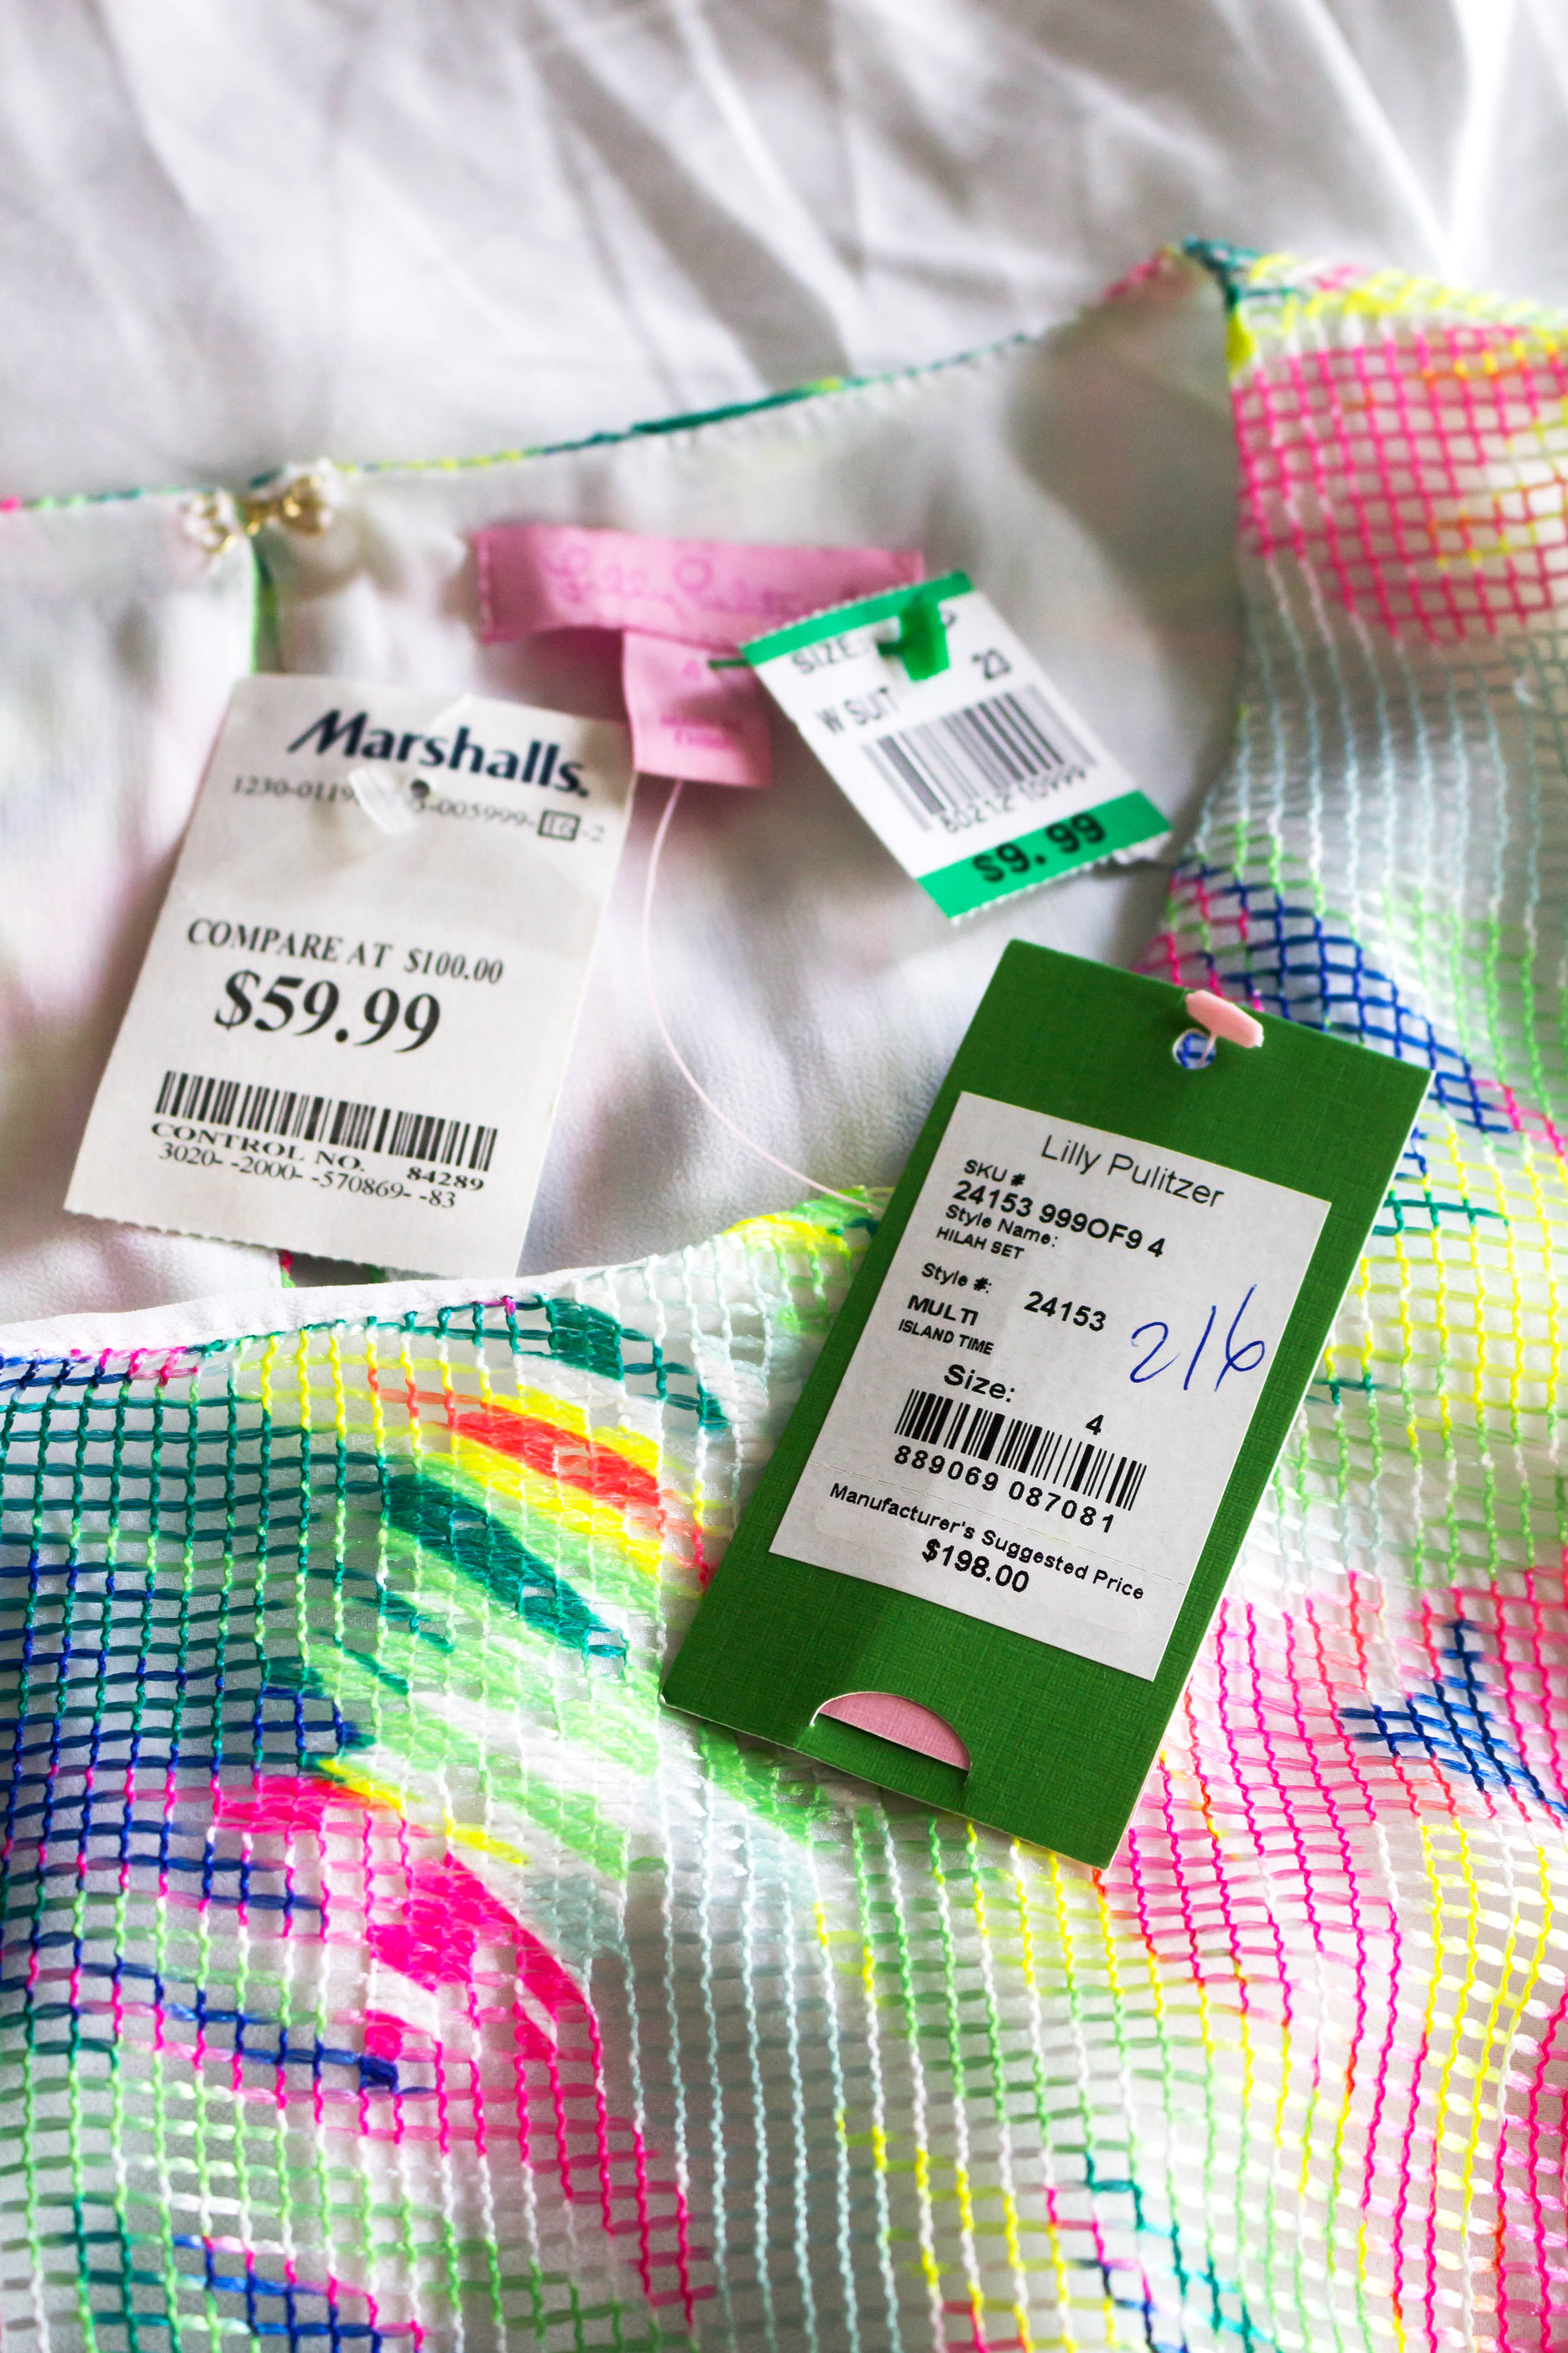 Lilly Pulitzer: A Favorite Poshmark Brand to Sell